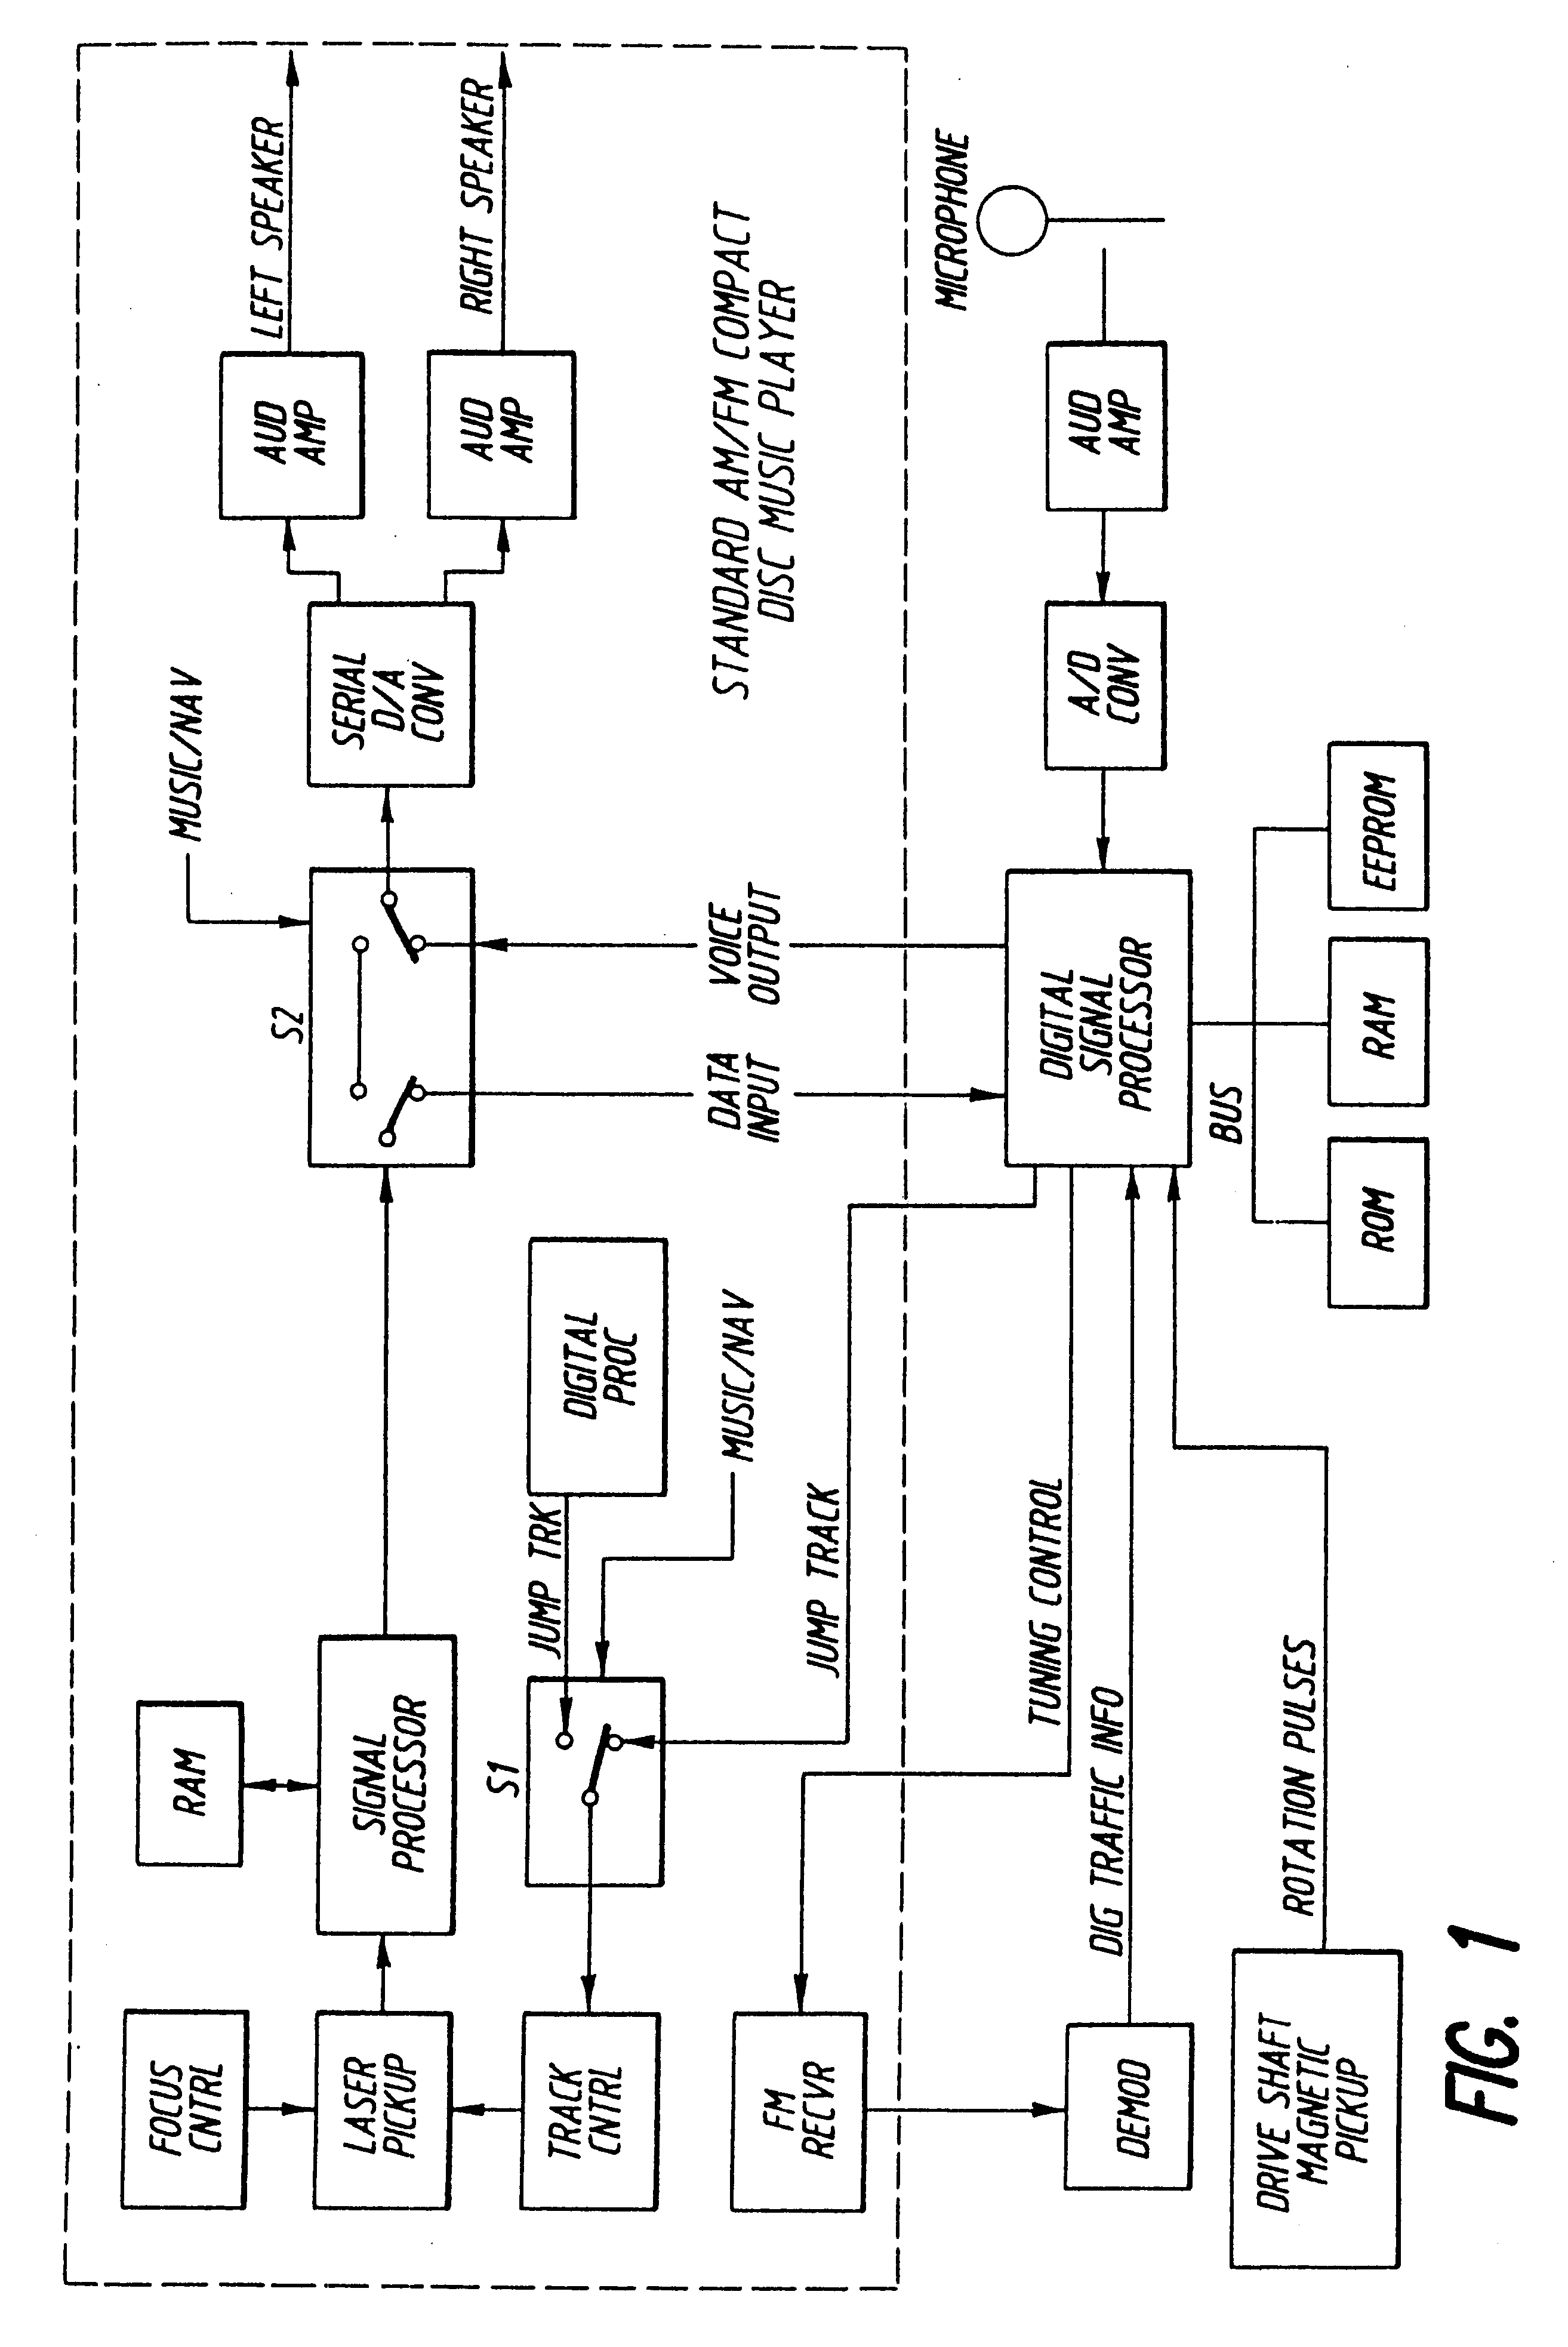 Sensor free vehicle navigation system utilizing a voice input/output interface for routing a driver from his source point to his destination point